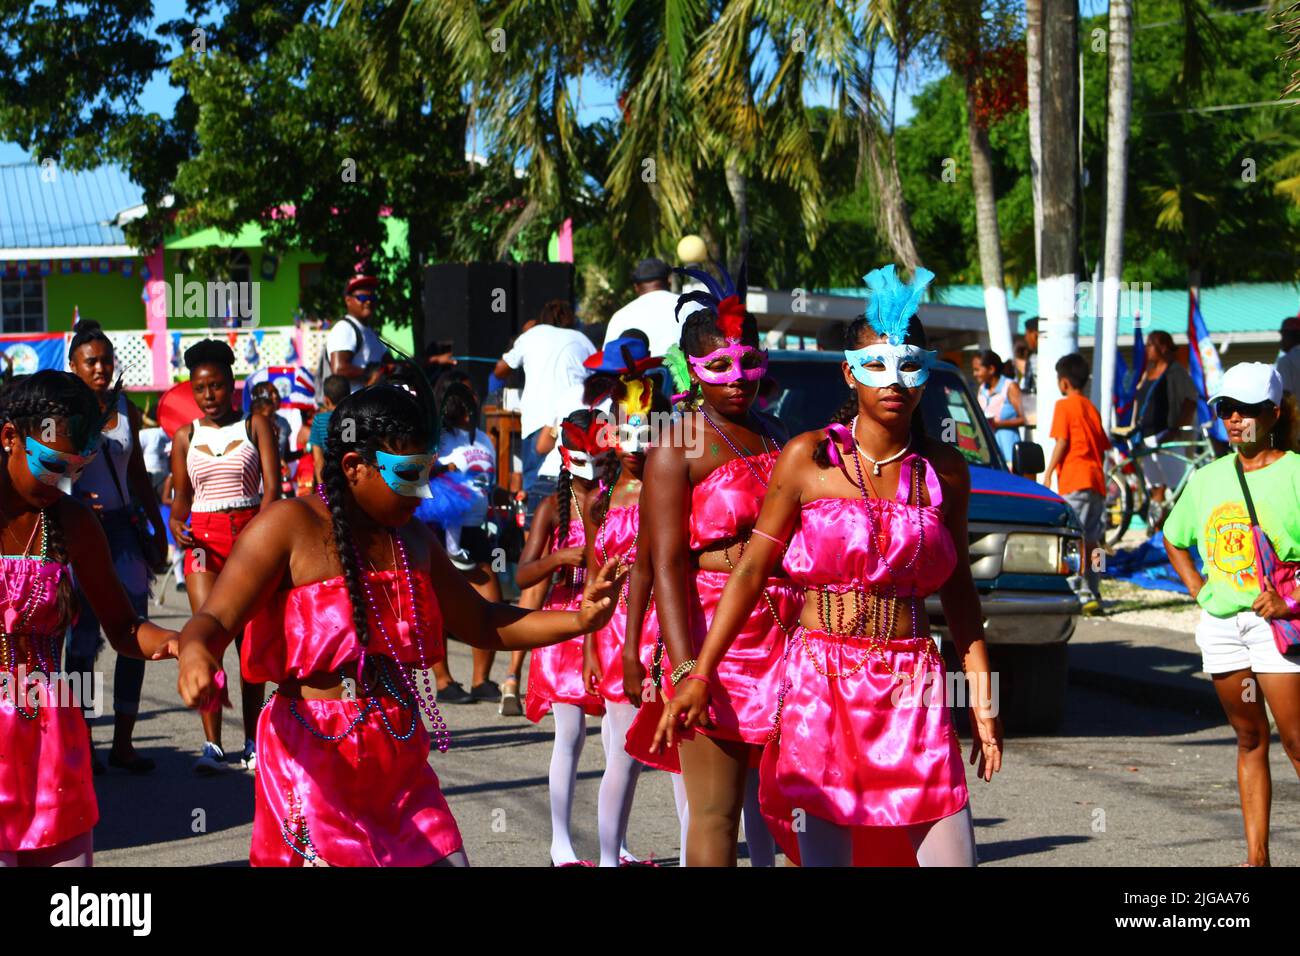 PUNTA GORDA, BELIZE - SEPTEMBER 10, 2016 St. George’s Caye Day celebrations and carnival lines of girls in pink costumes with masks with onlookers Stock Photo